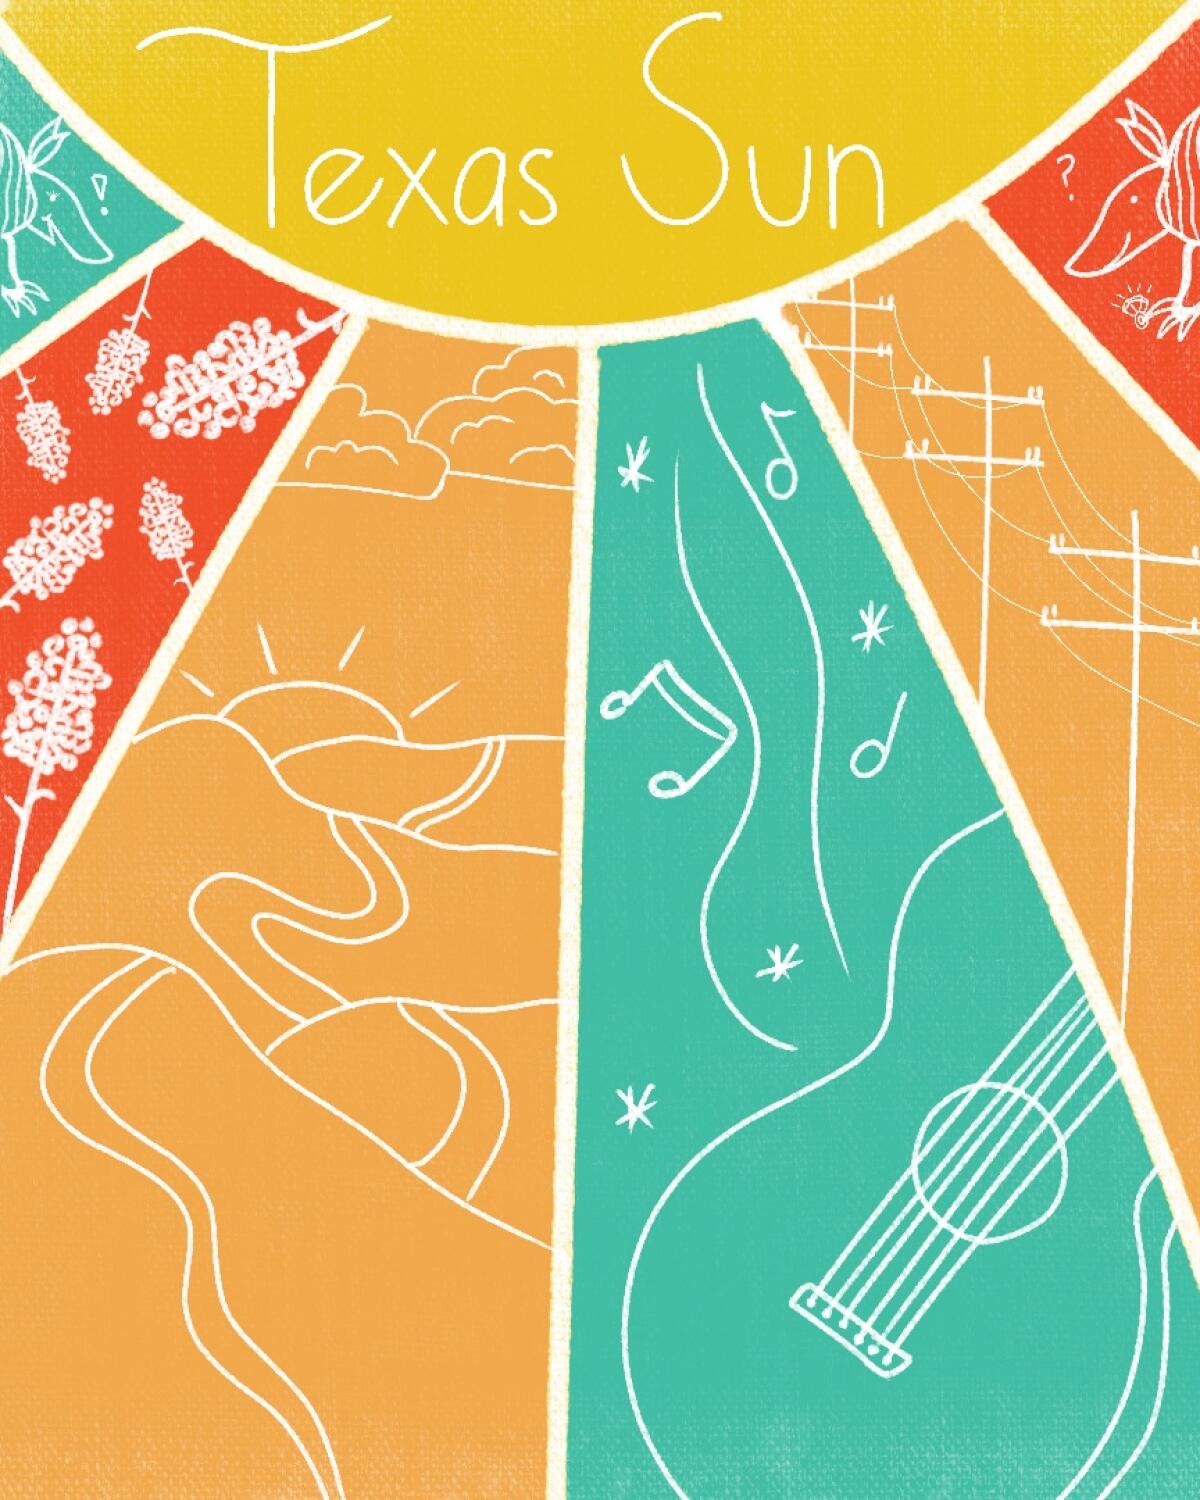 Illustration for the song "Texas Sun" by Khruangbin and Leon Bridges